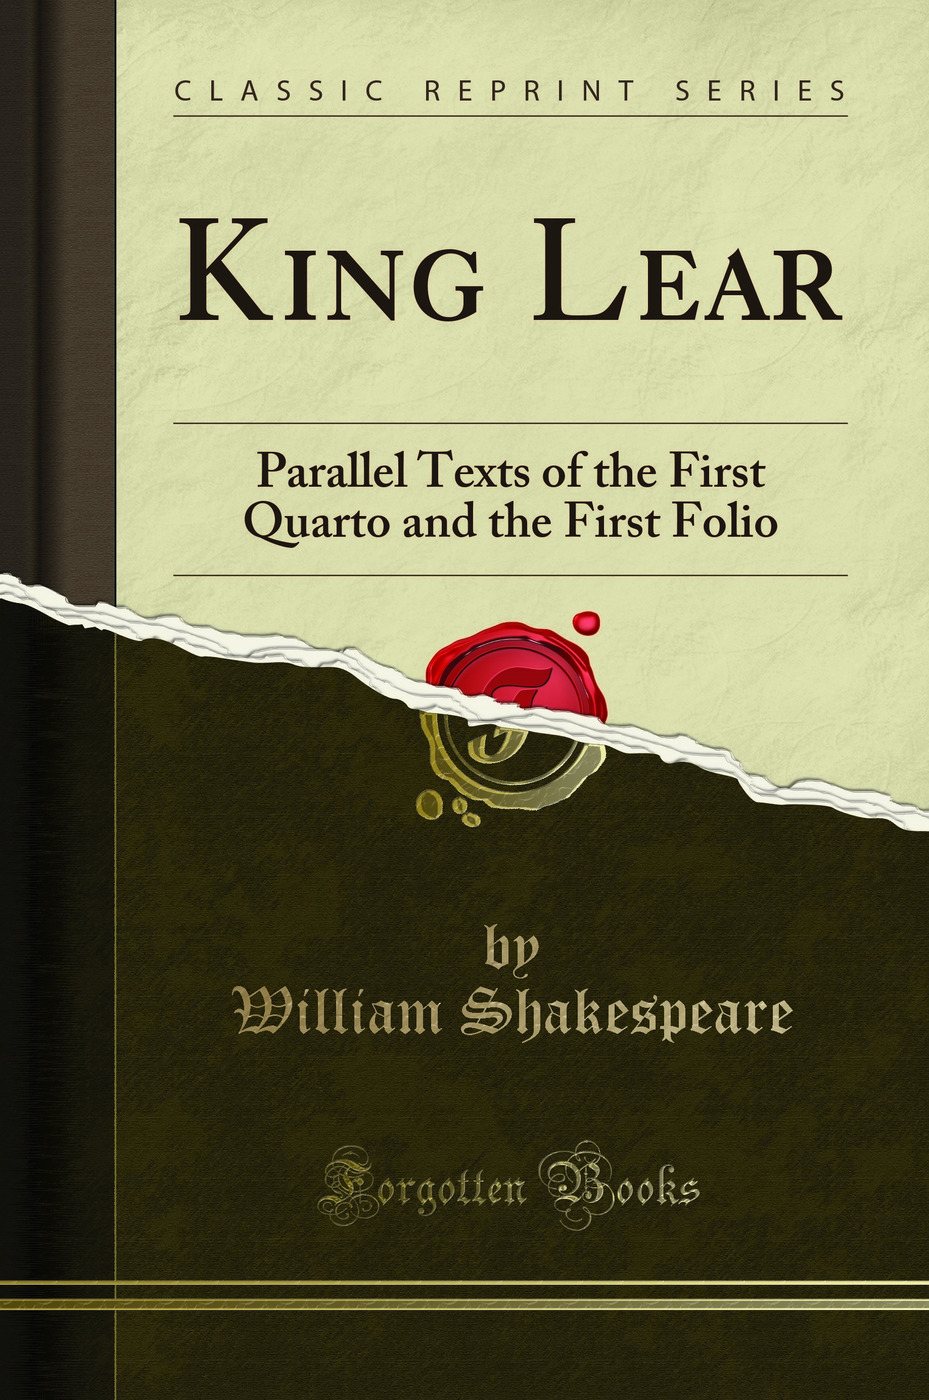 King Lear: Parallel Texts of the First Quarto and the First Folio - William Shakespeare